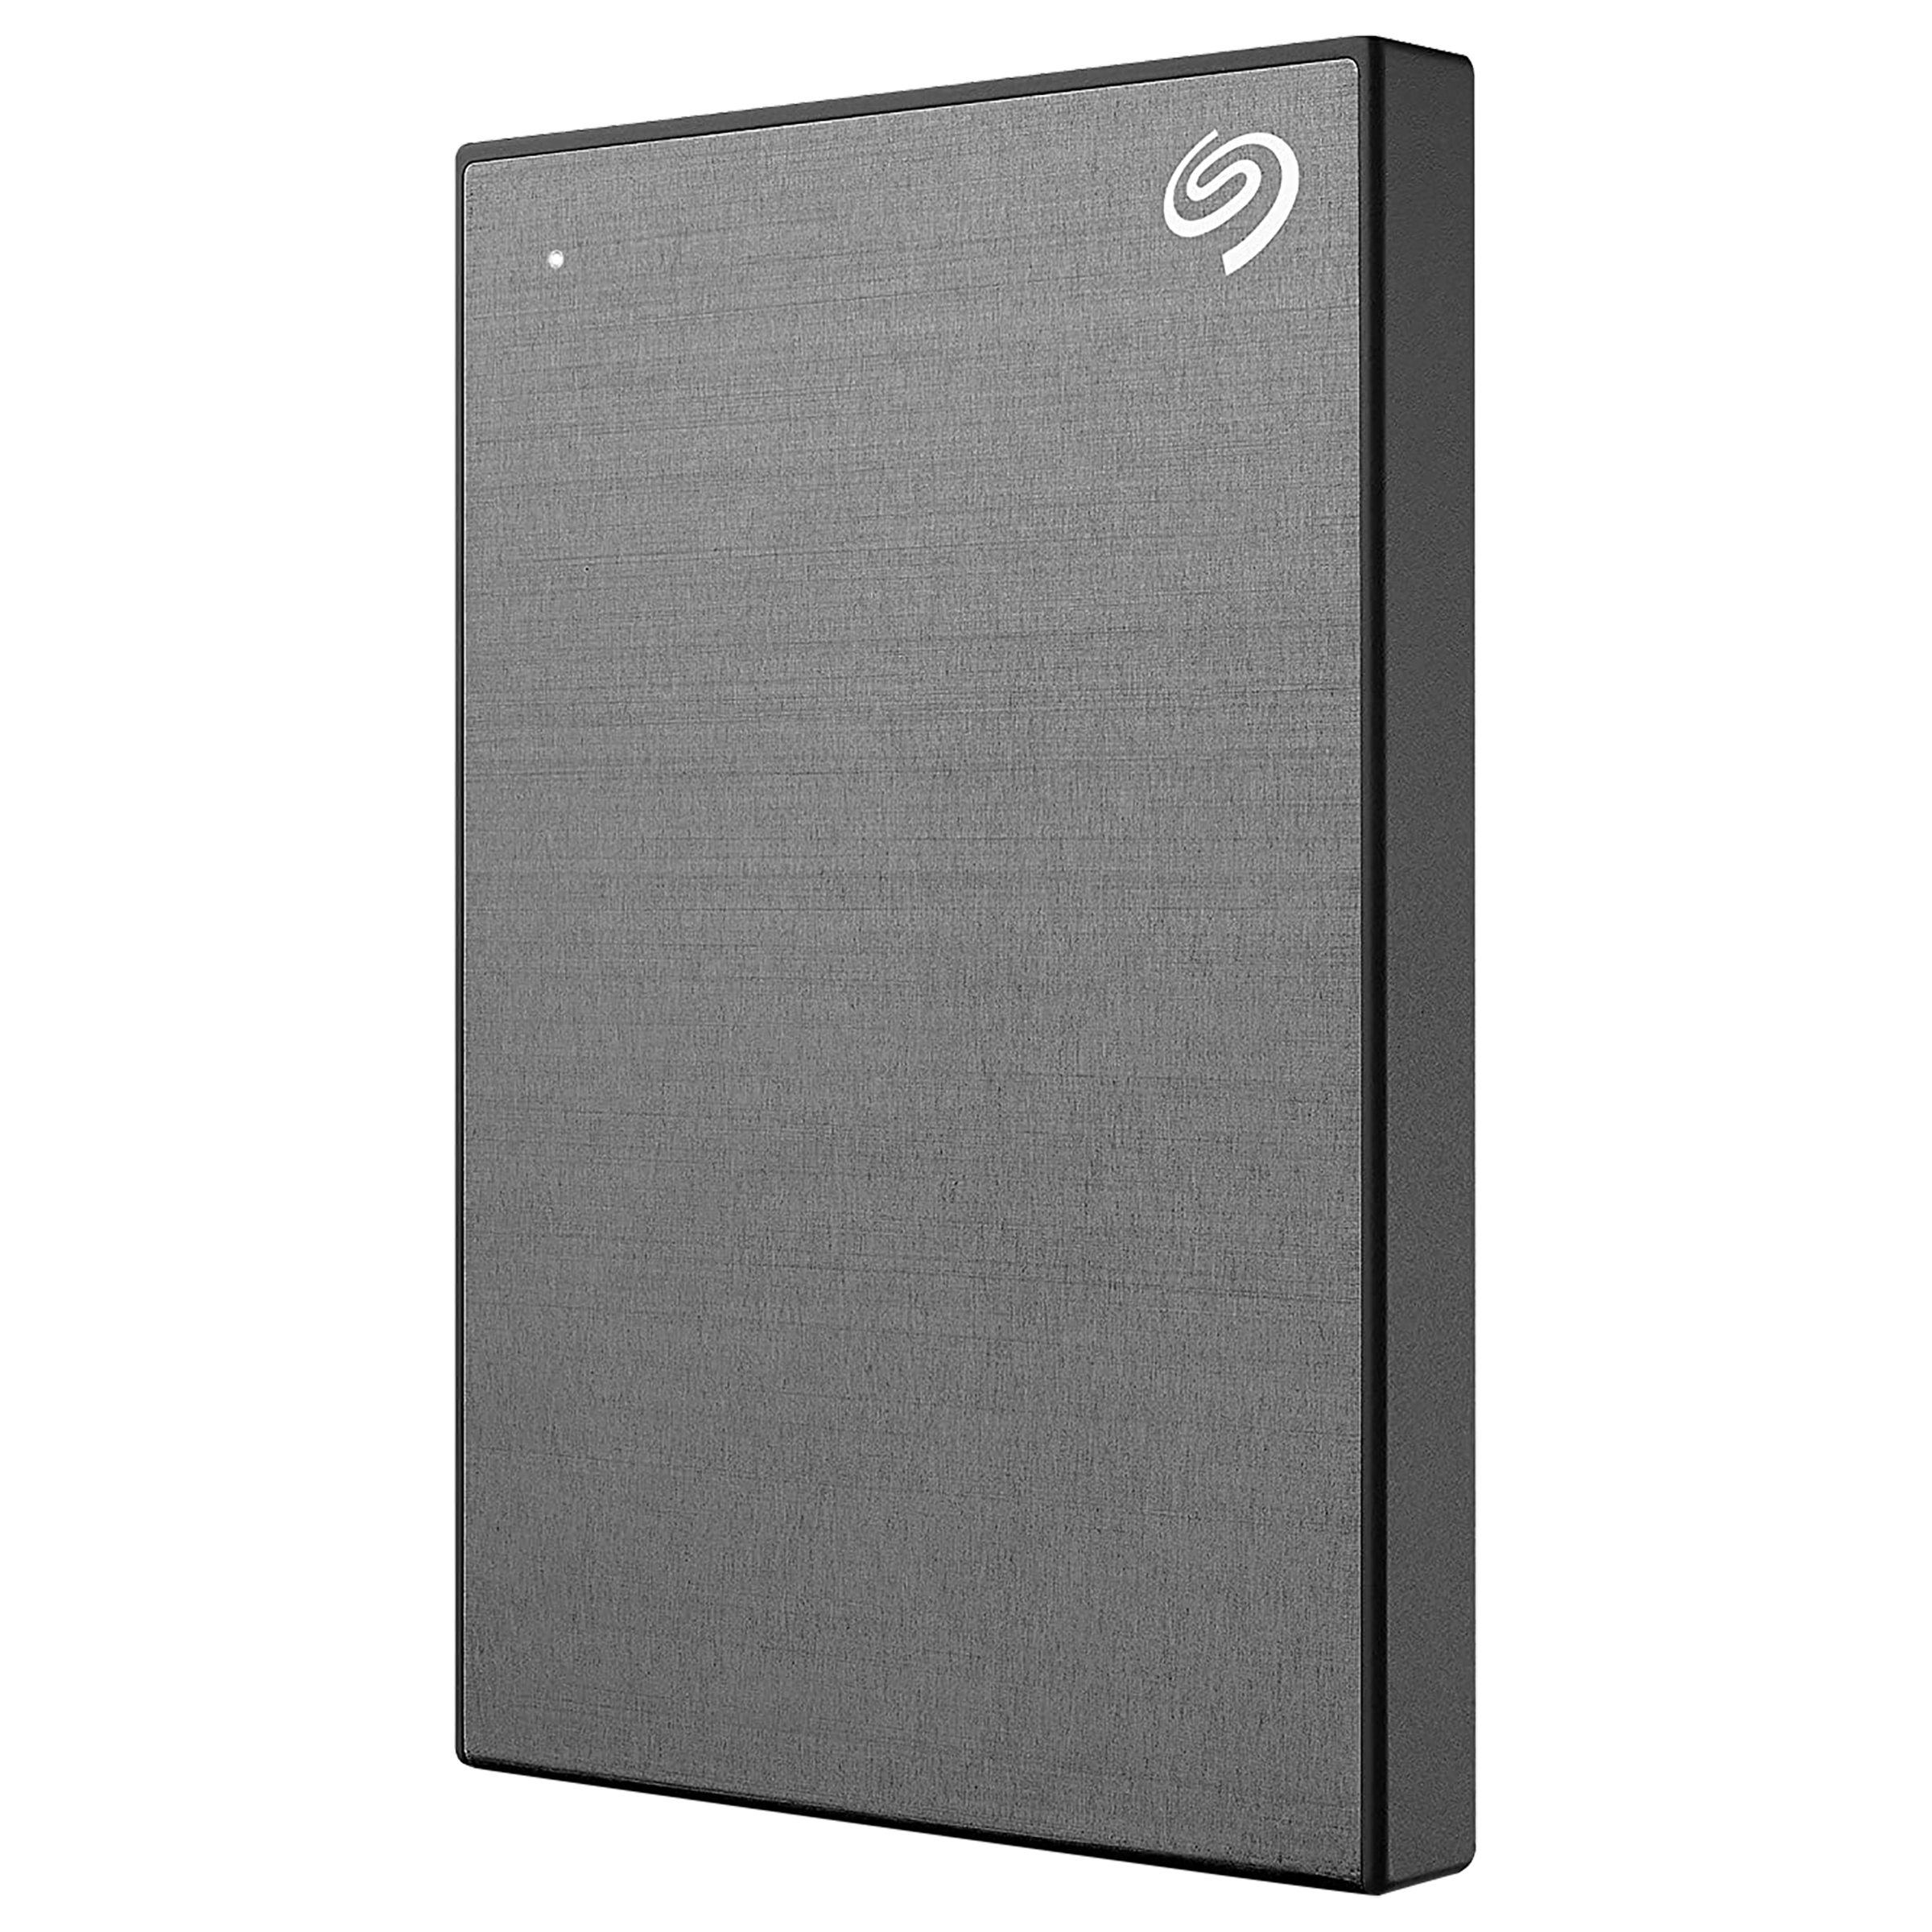 Seagate One Touch 2TB USB 3.0 Hard Disk Drive (Password Activated Hardware Encryption, STKY2000404, Grey)_1